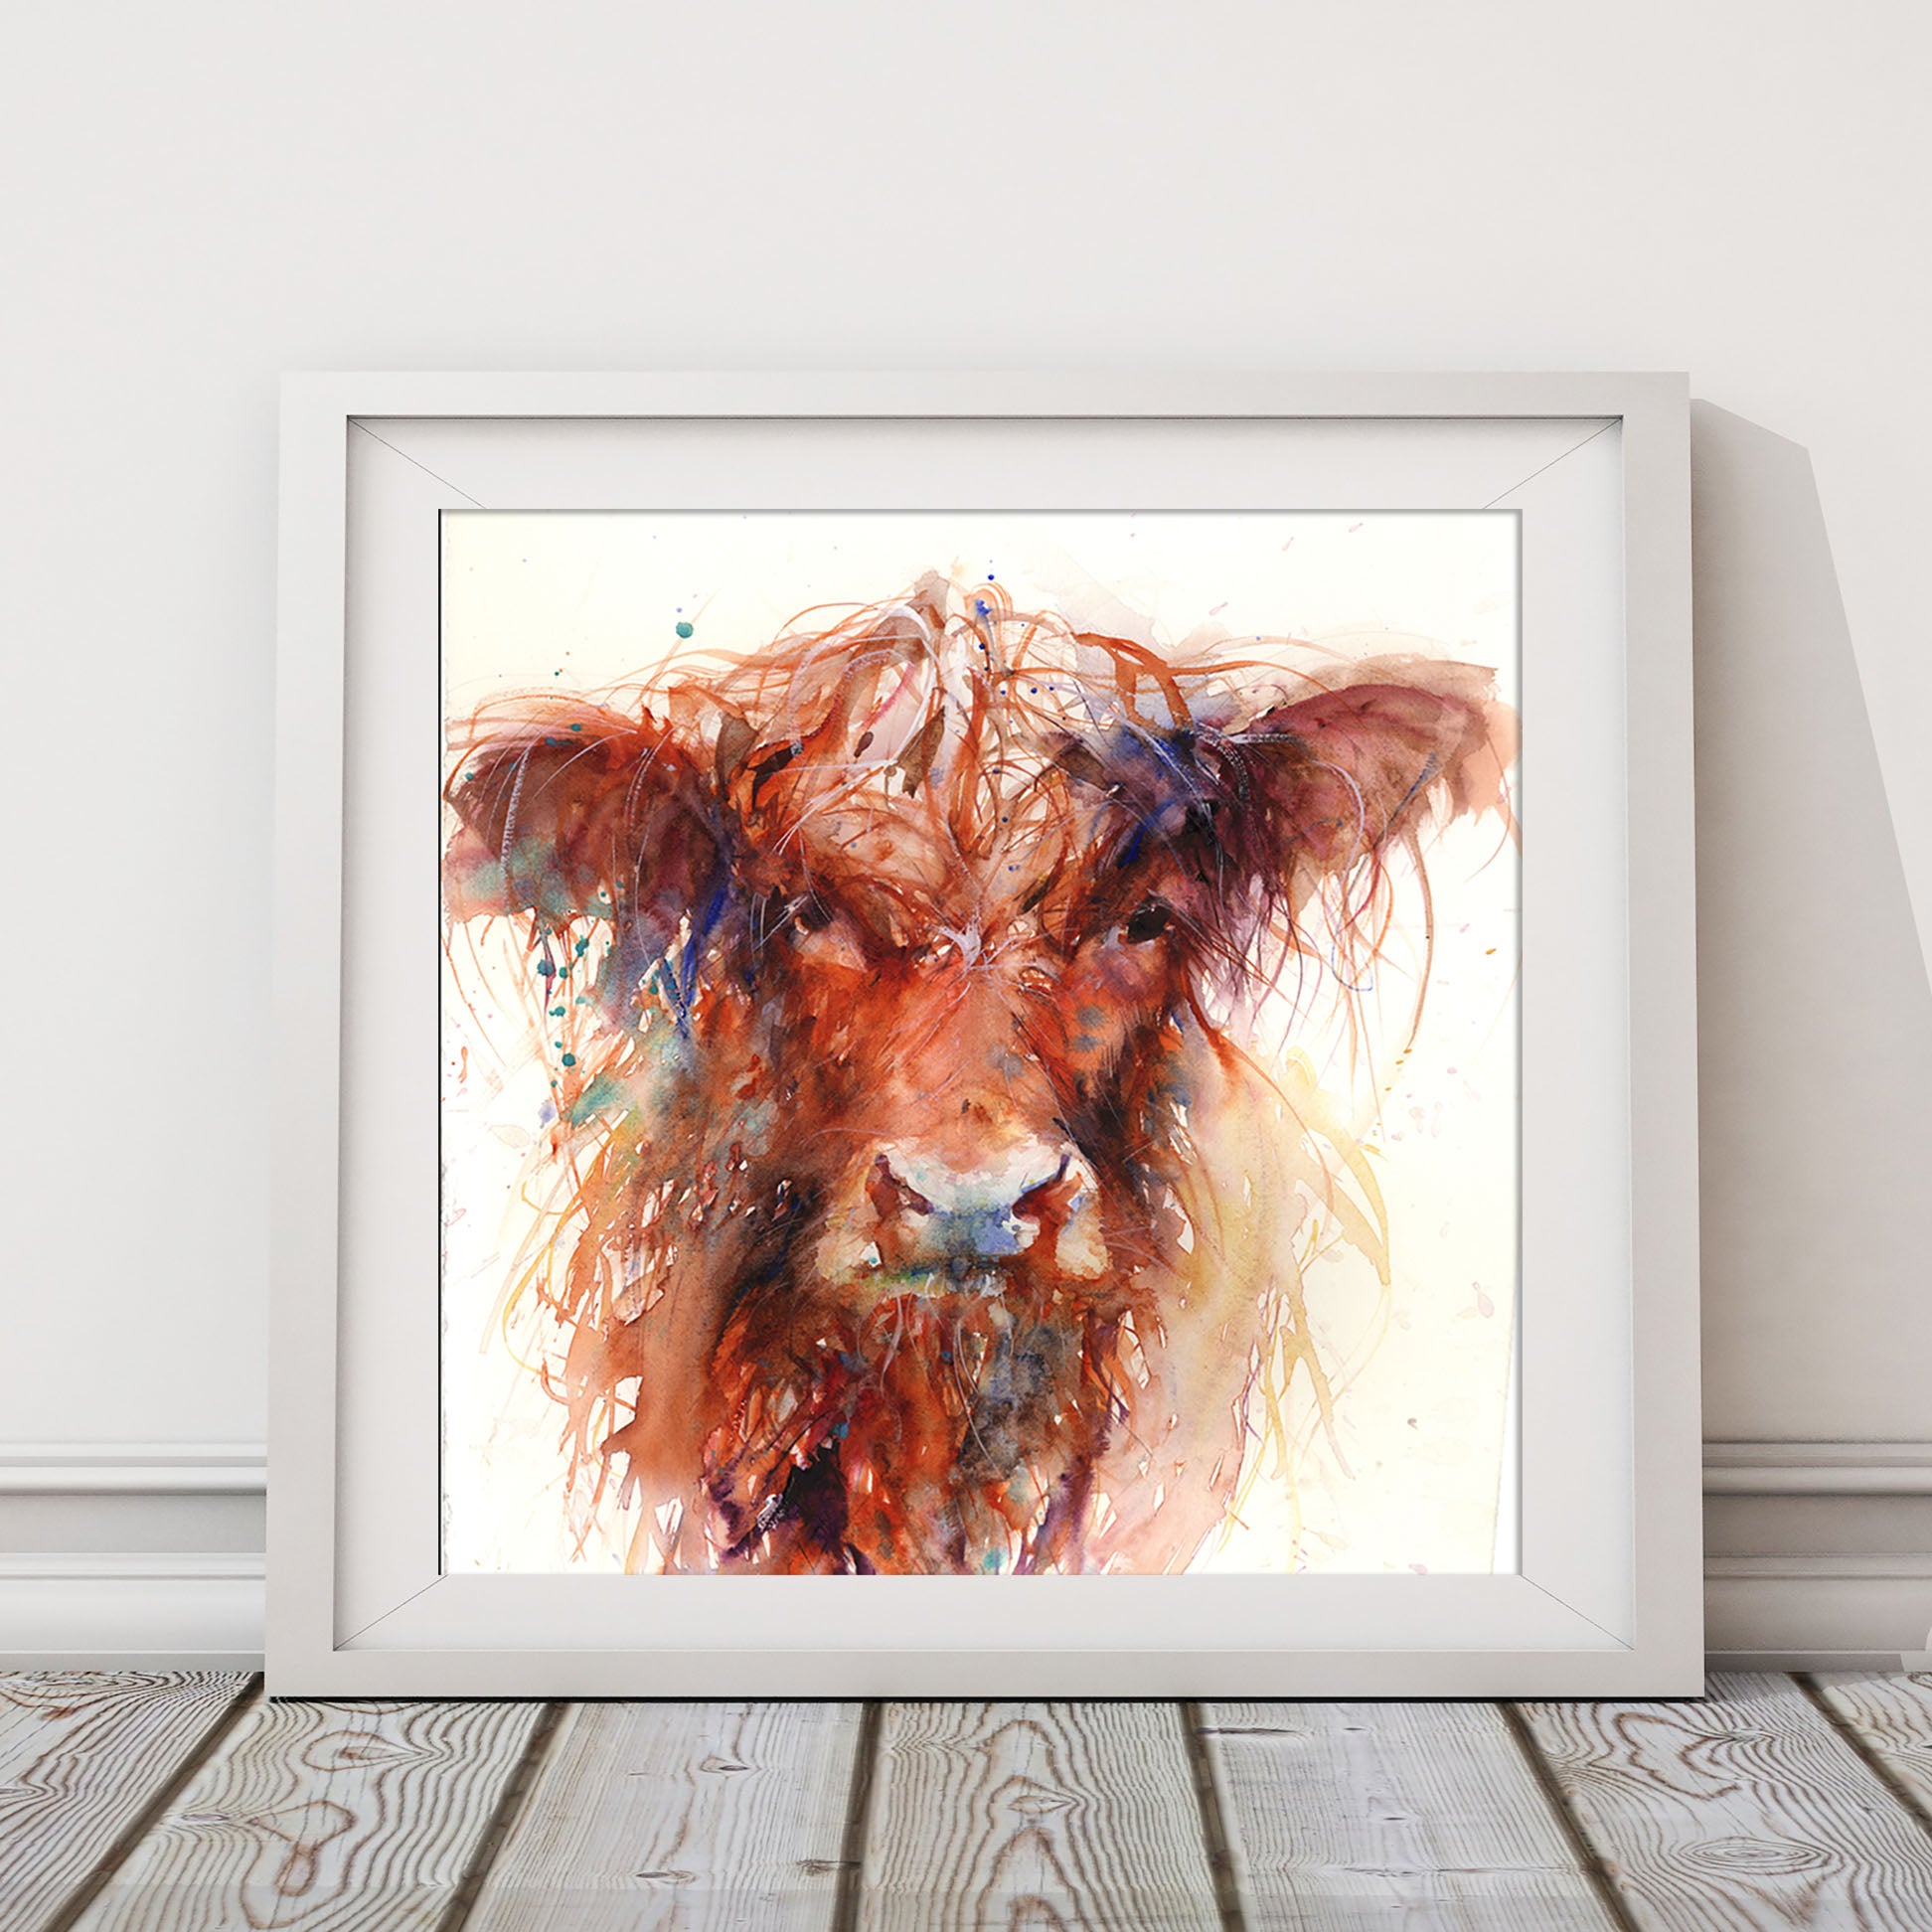 Highland Cow limited edition print - Jen Buckley Art limited edition animal art prints